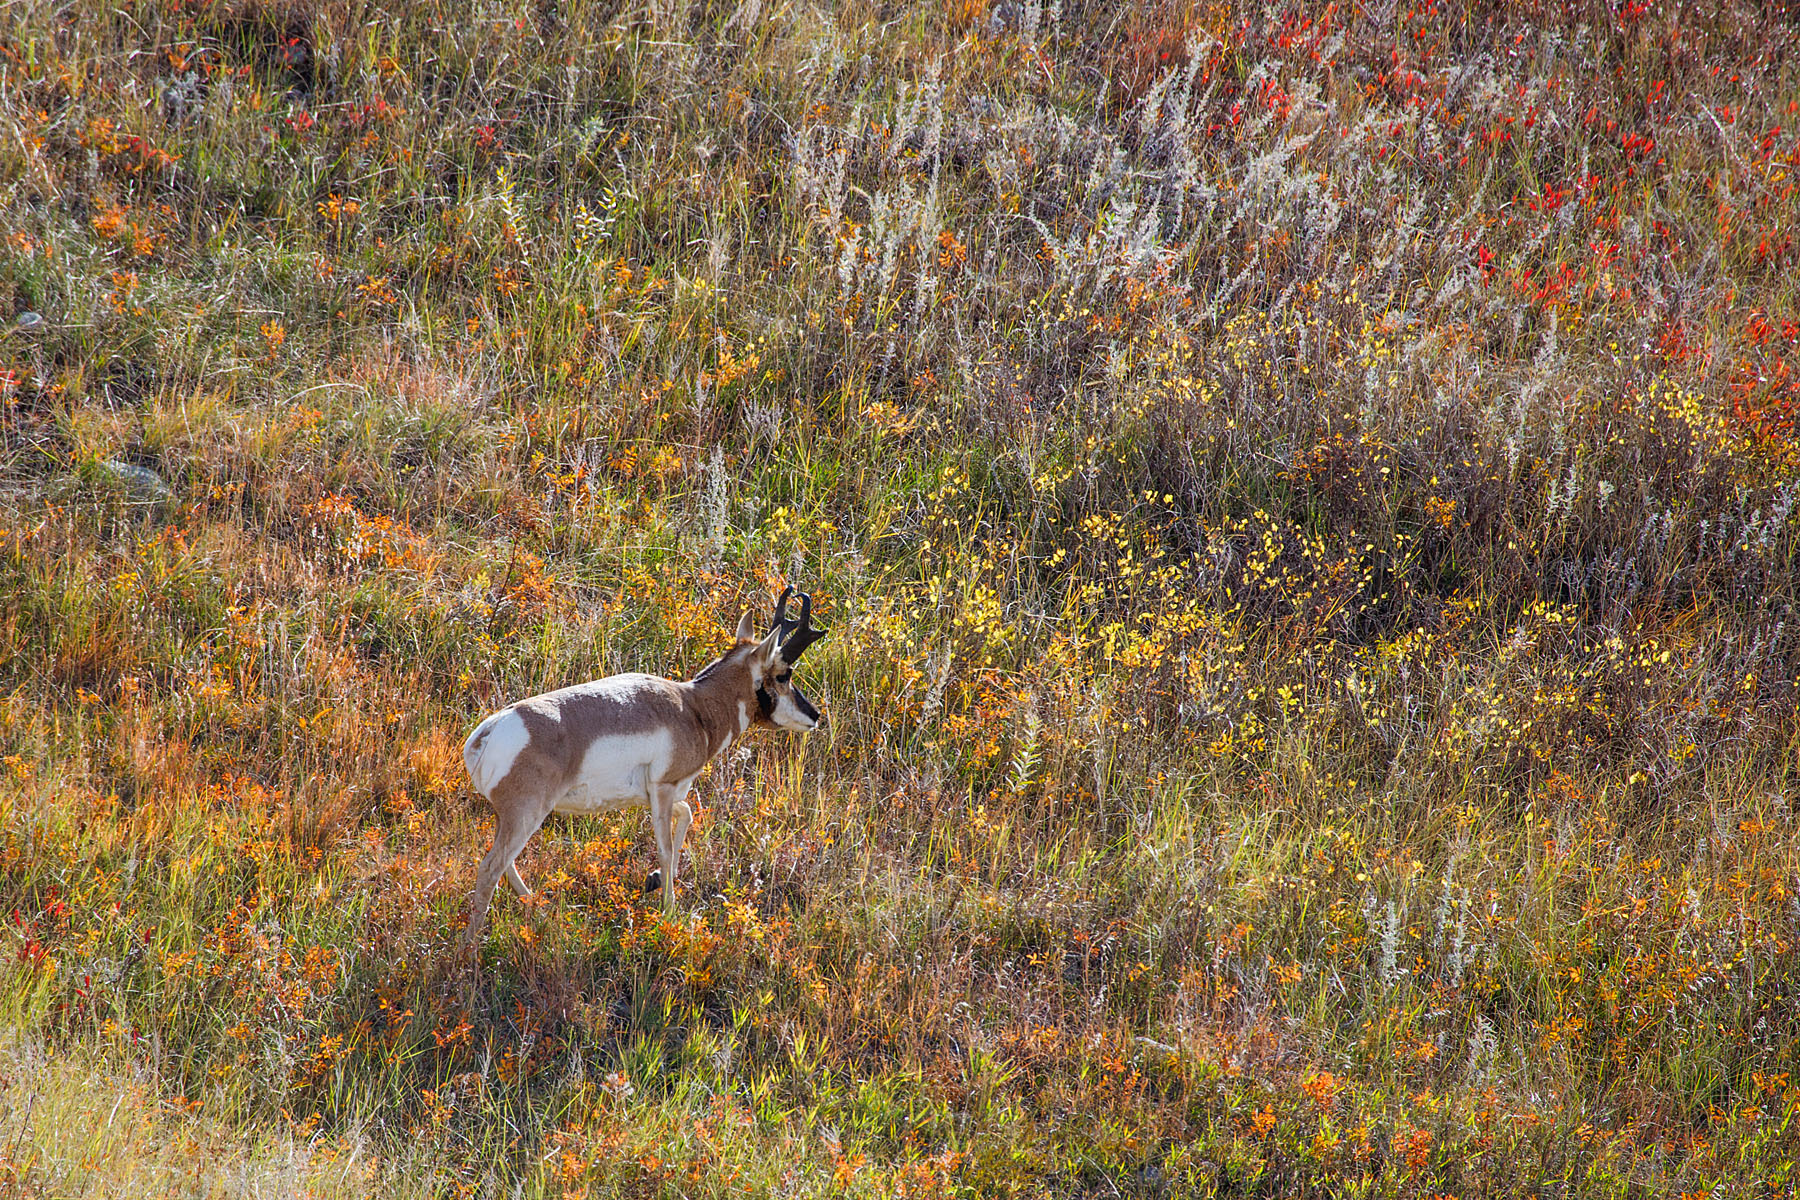 Pronghorn among autumn vegetation, Custer State Park.  Click for next photo.